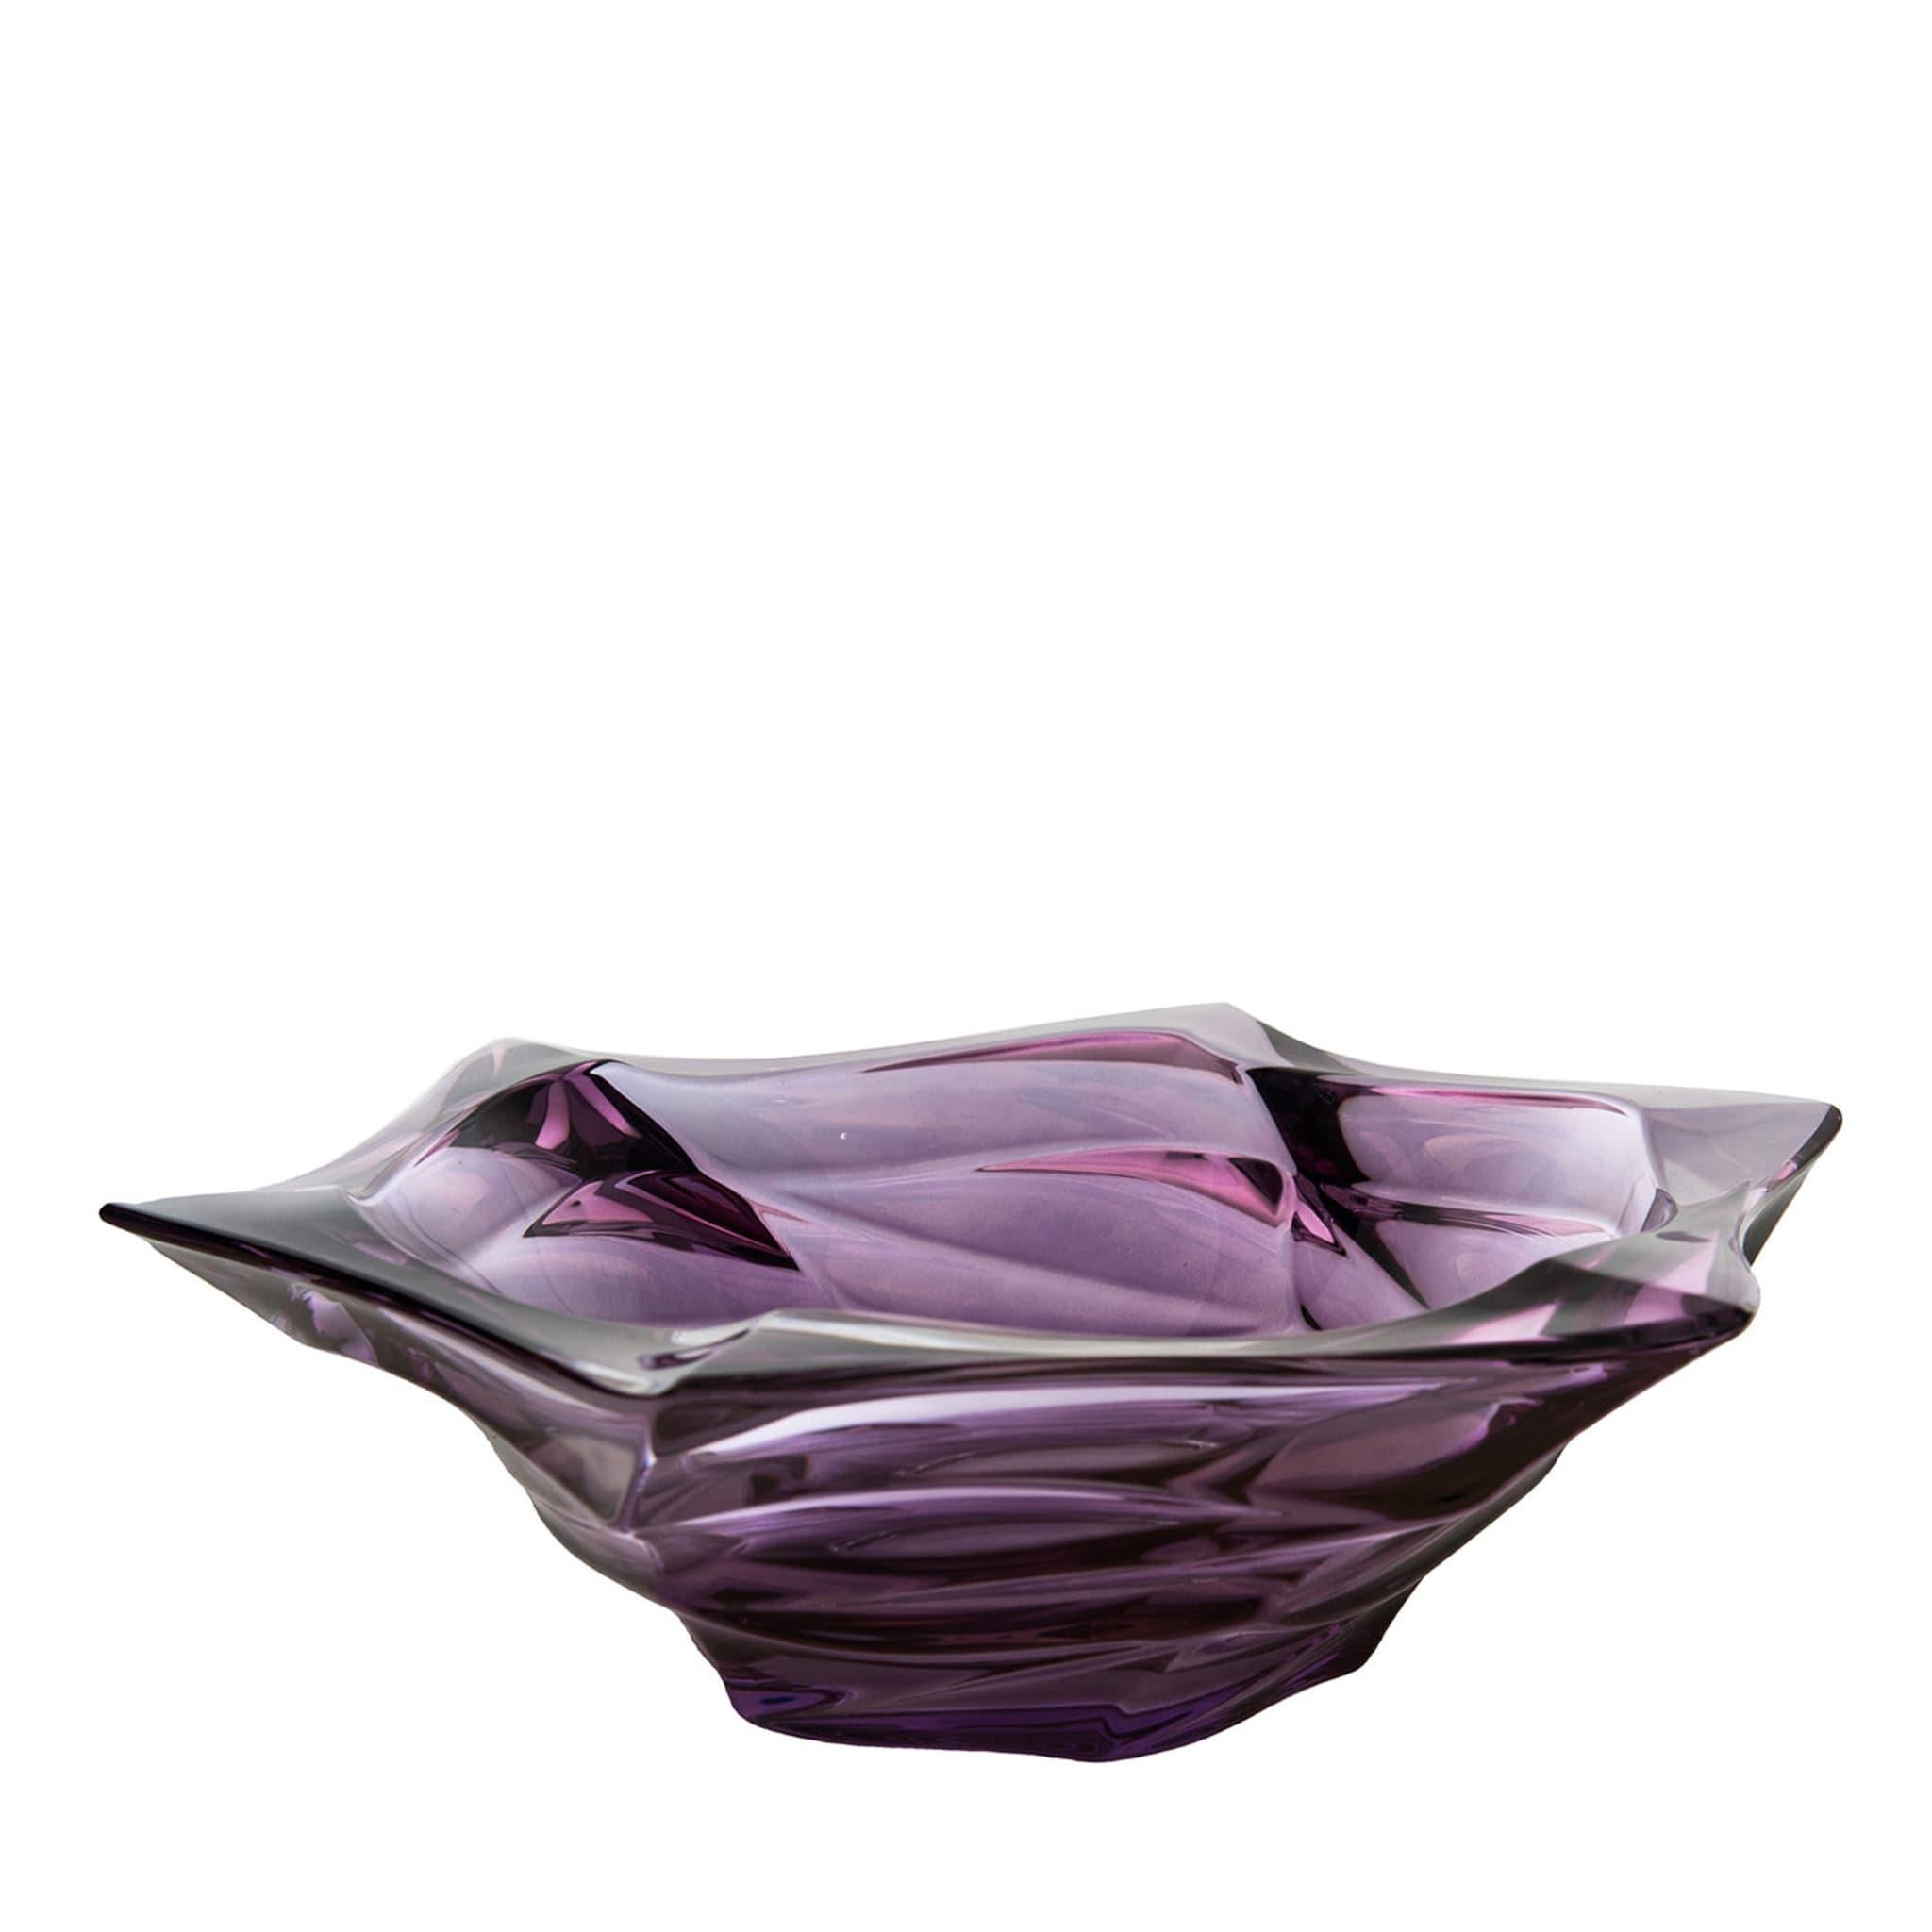 A sculptural objet d'art masterfully handcrafted of mouth-blown glass, it will be an elegant centerpiece on a dining table, or a versatile bowl to place in a refined entryway. Marked by a bold silhouette of strong textural value, it is enhanced with